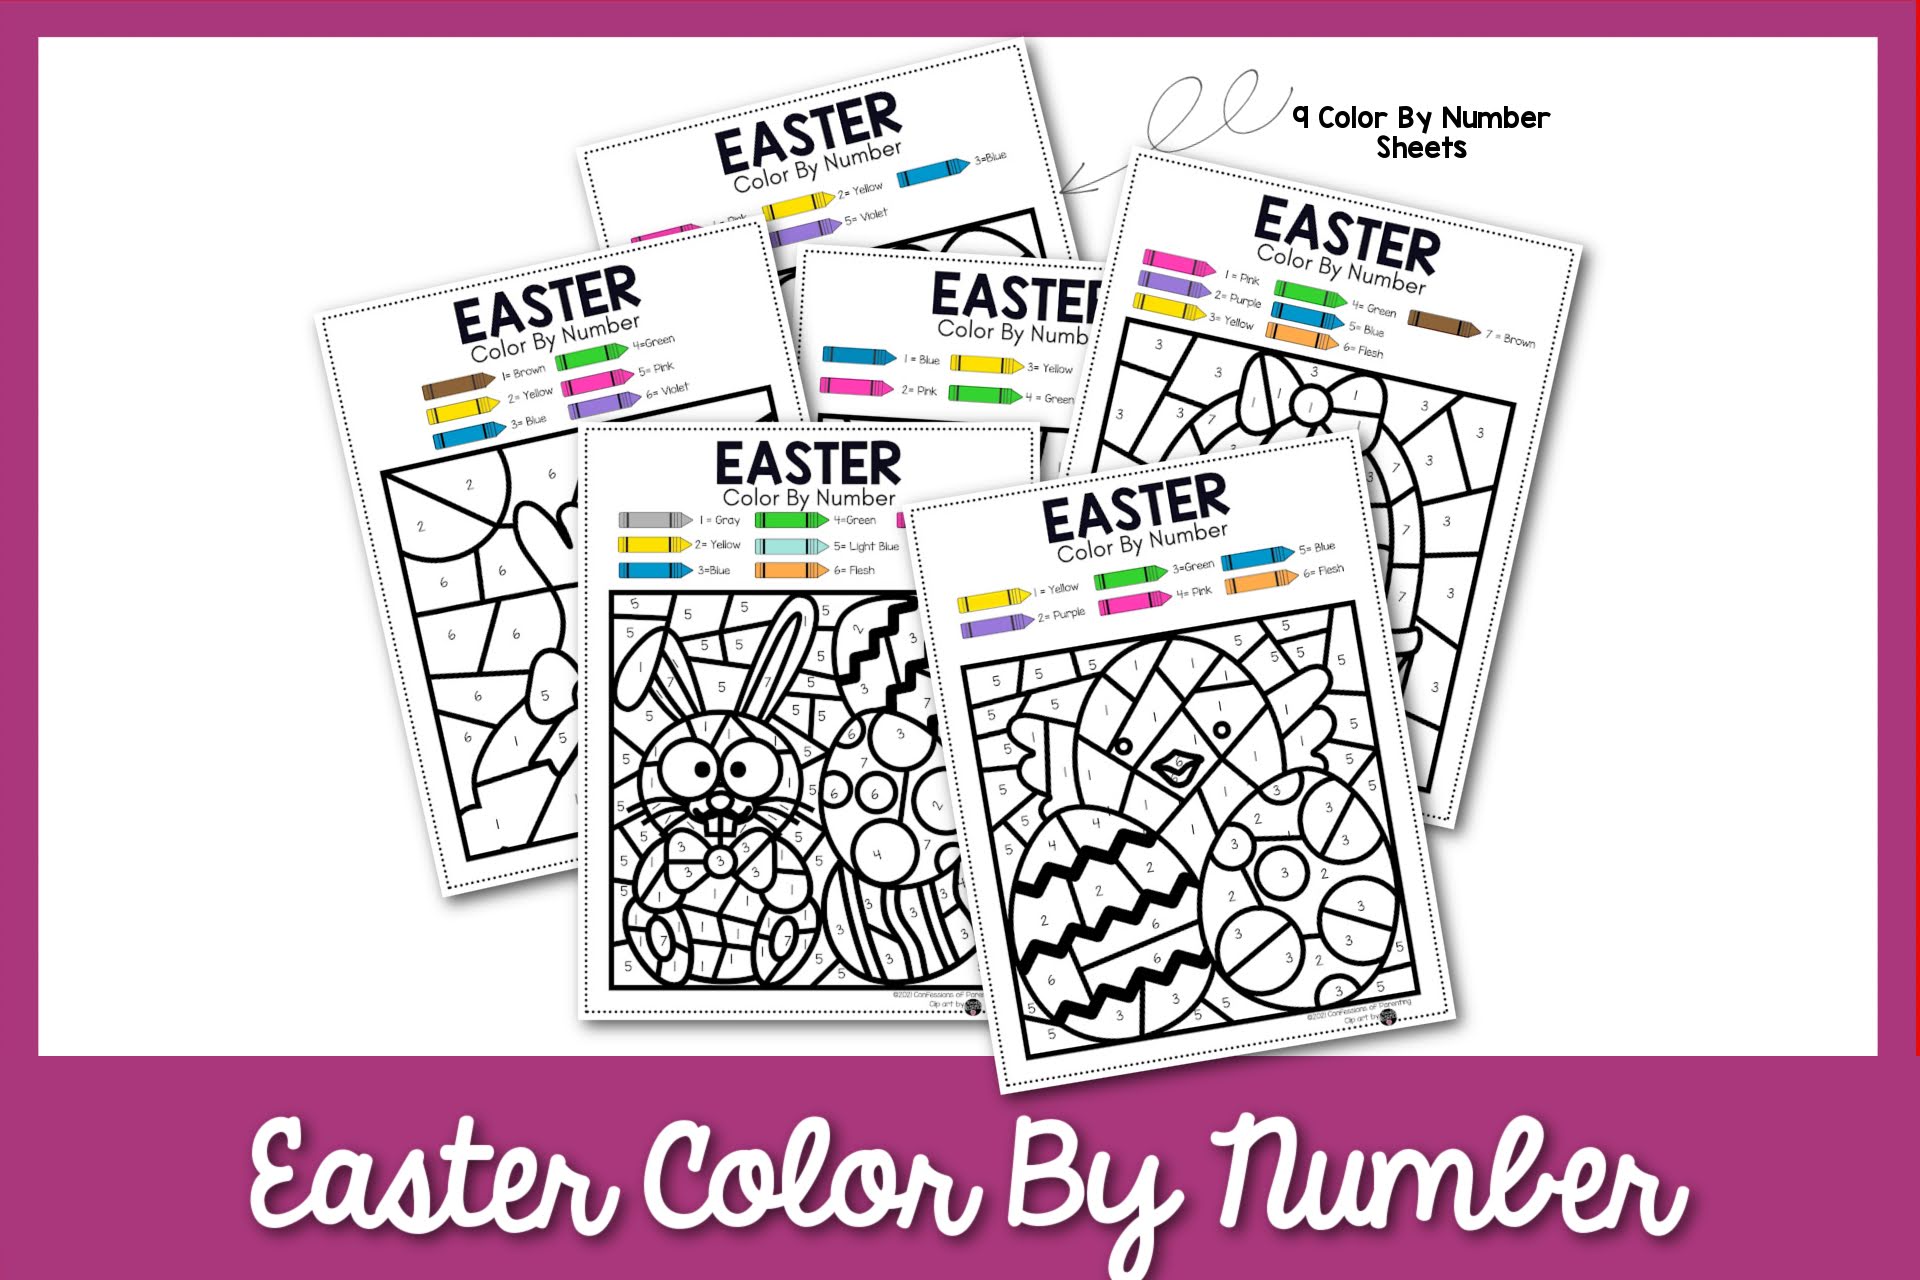 featured image: easter color by number on a purple border